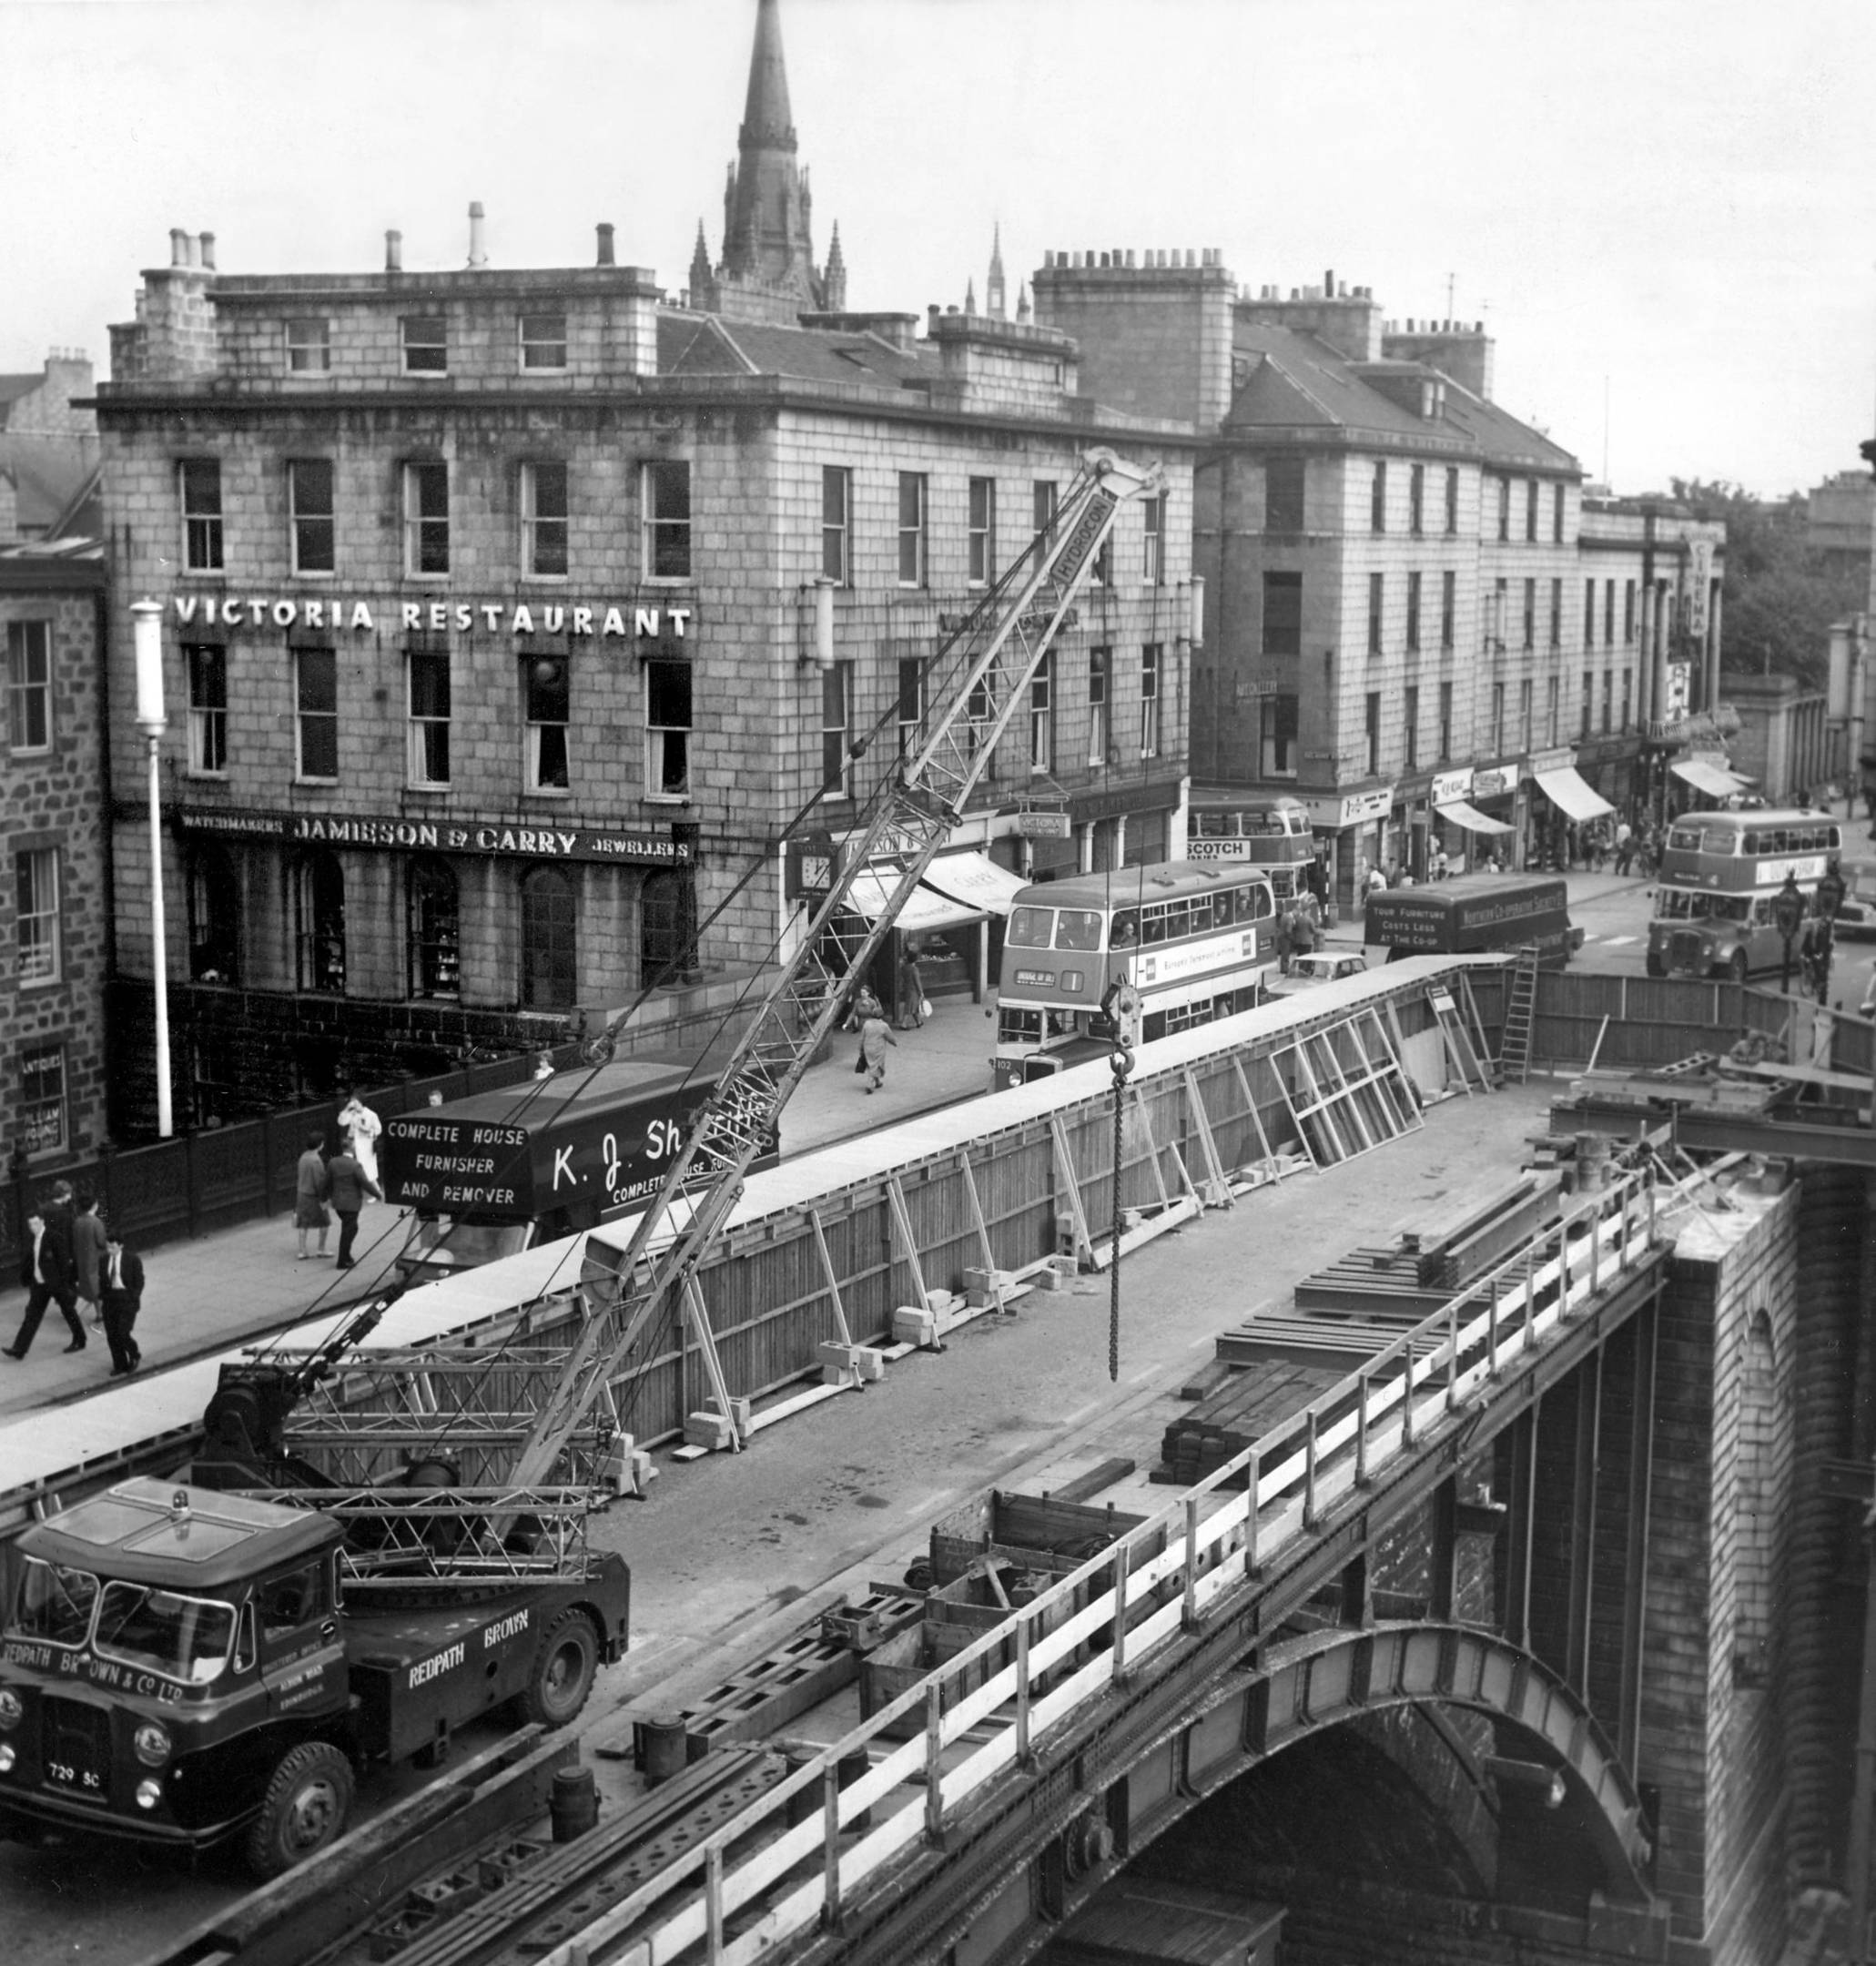 The Granite Mile The story of Aberdeen's Union Street p.76 by Diane Morgan A close up of the same view in 1963. The Victoria Restaurant, a popular rendezvous which opened in the mid-fifties, has replaced the Aberdeen Hotel. Jamieson & Carry, jewellers, is below, and in the foreground is a glimpse of the south side of Union Street before the shops went up. Right of the bus, just visible, emerging from Belmont Street (traffic on the bridge is single line, and buses have been re-routed) is the tall building which initially included the Archibald Simpson office. It was rebuilt after the fire of 1826, a "twin" has been added, and the group expanded to the east. This block now numbers Nos 122 1/2-132 and currently includes Symington's/Reed Employment and O'Brian's/McColls. Irene Adair Fashions and Munros Tourist Agency were located here in modern times. Opposite the bus, extreme right are, No 122 James Allan/Mothercare and the former Queens Cinema. Aberdeen Journals Ltd 12.9.1963